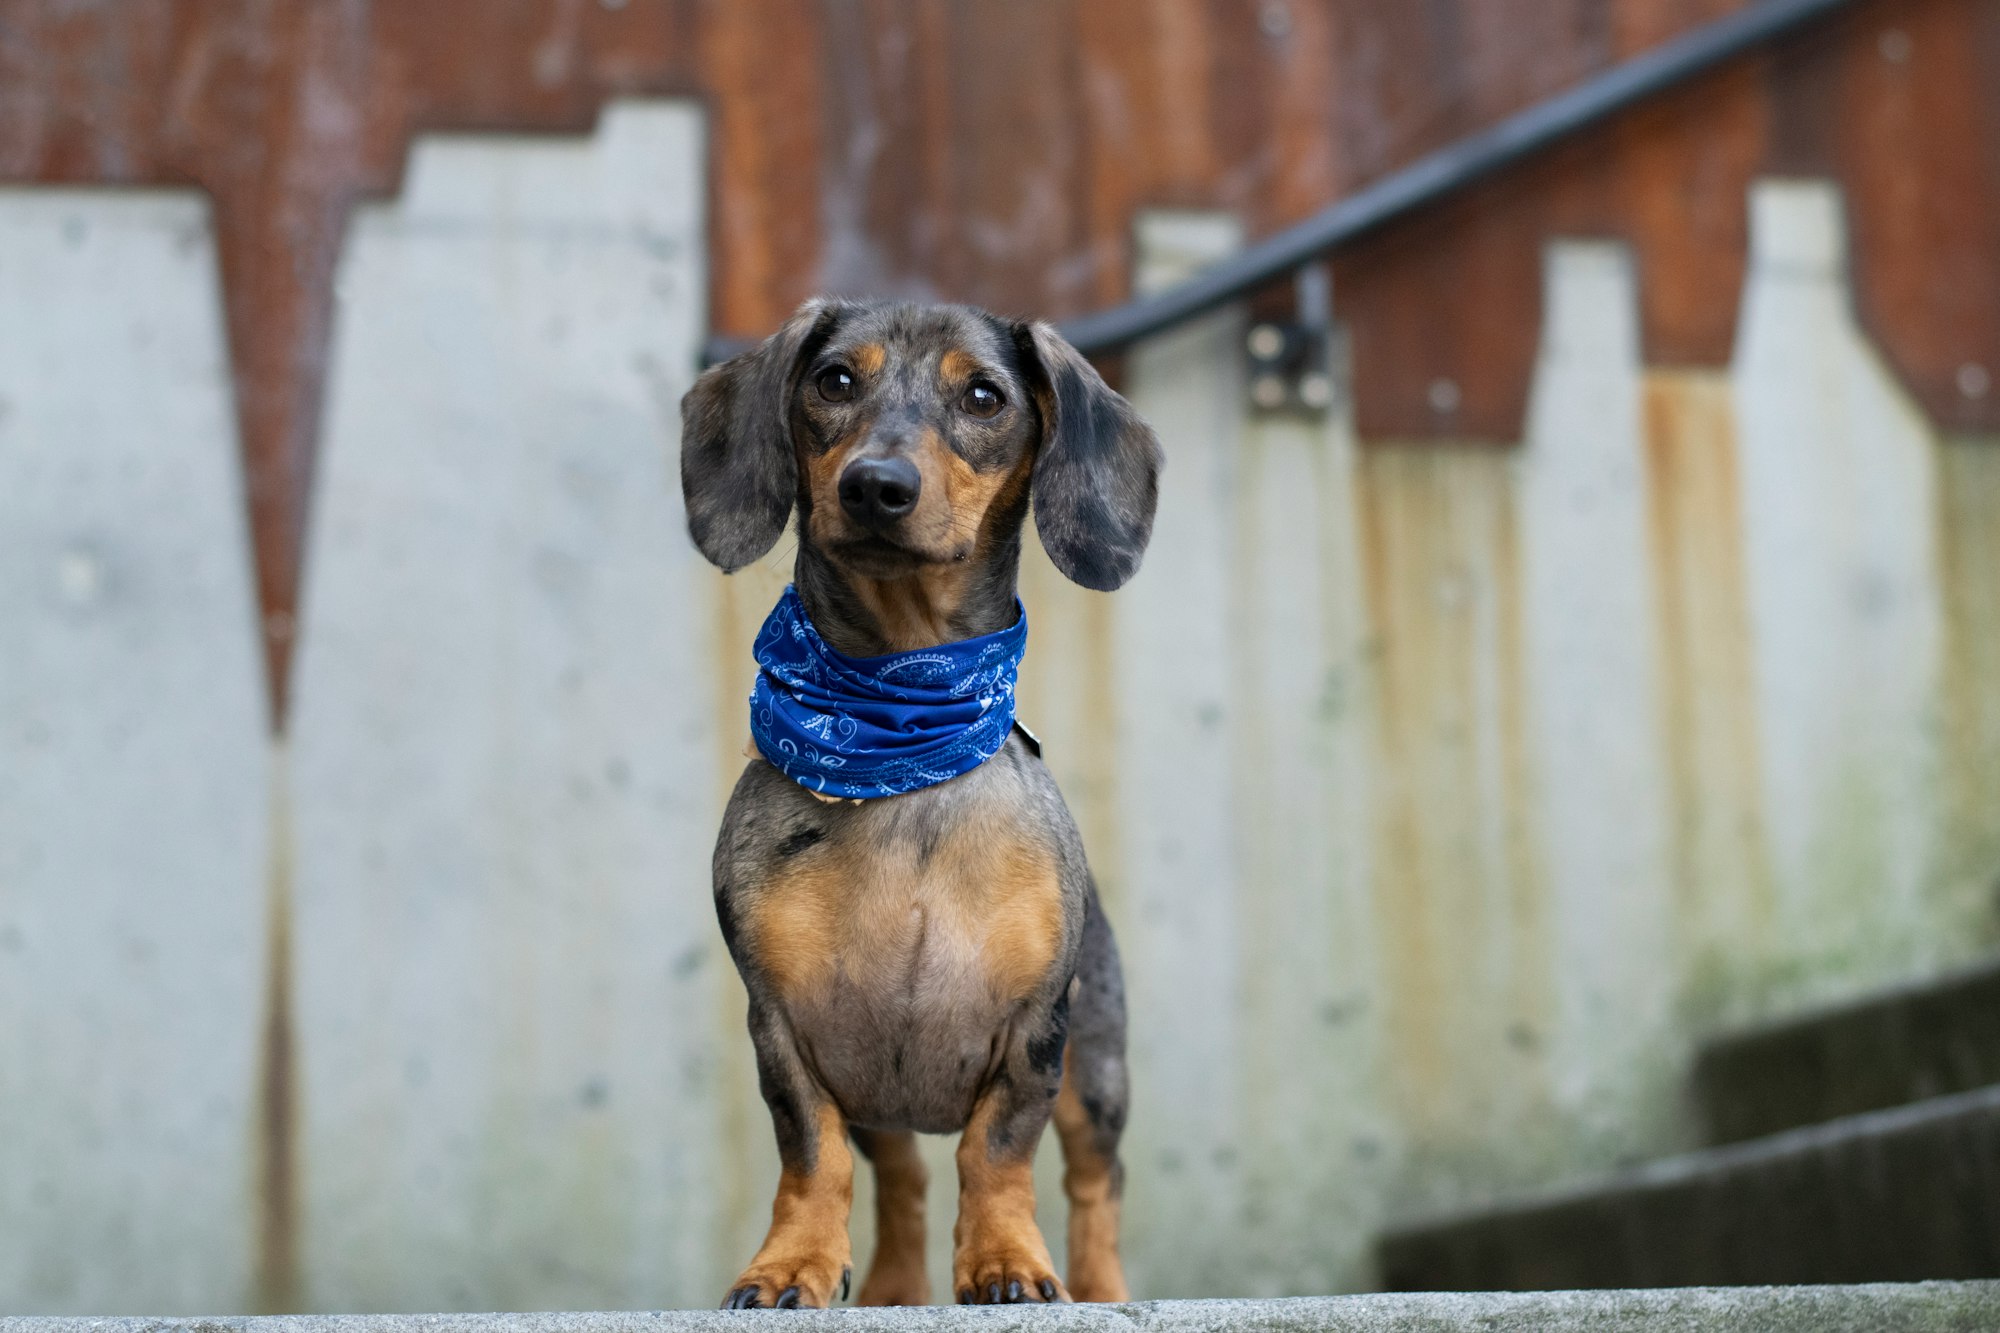 The Miniature Dachshund: What New Owners NEED to Know